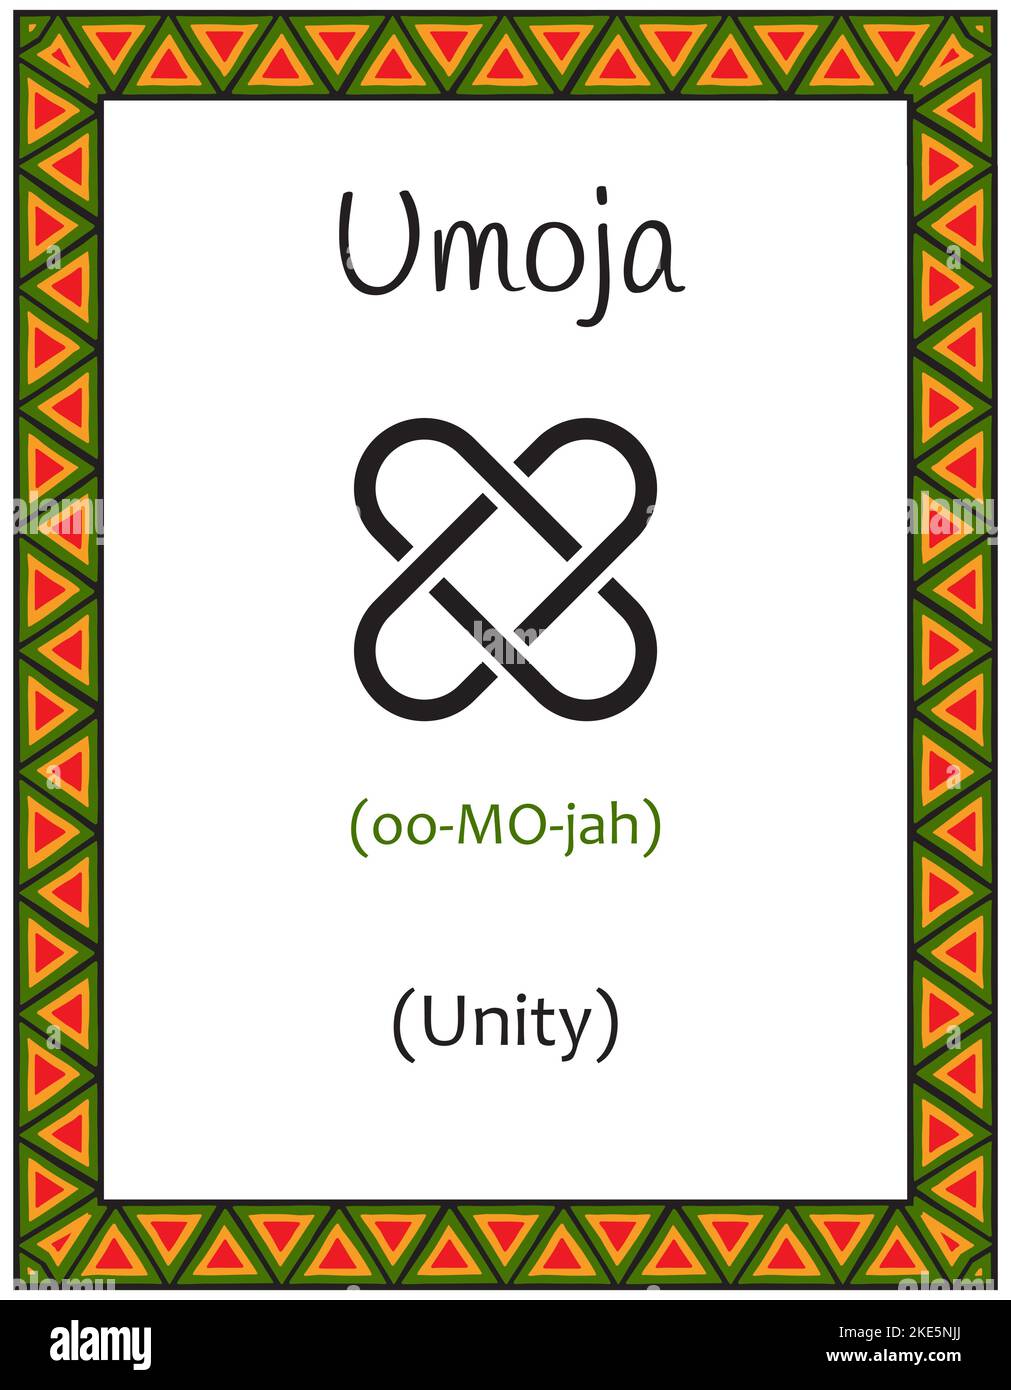 A card with one of the Kwanzaa principles. Symbol Umoja means Unity in Swahili. Poster with sign and description. Ethnic African pattern in traditiona Stock Vector